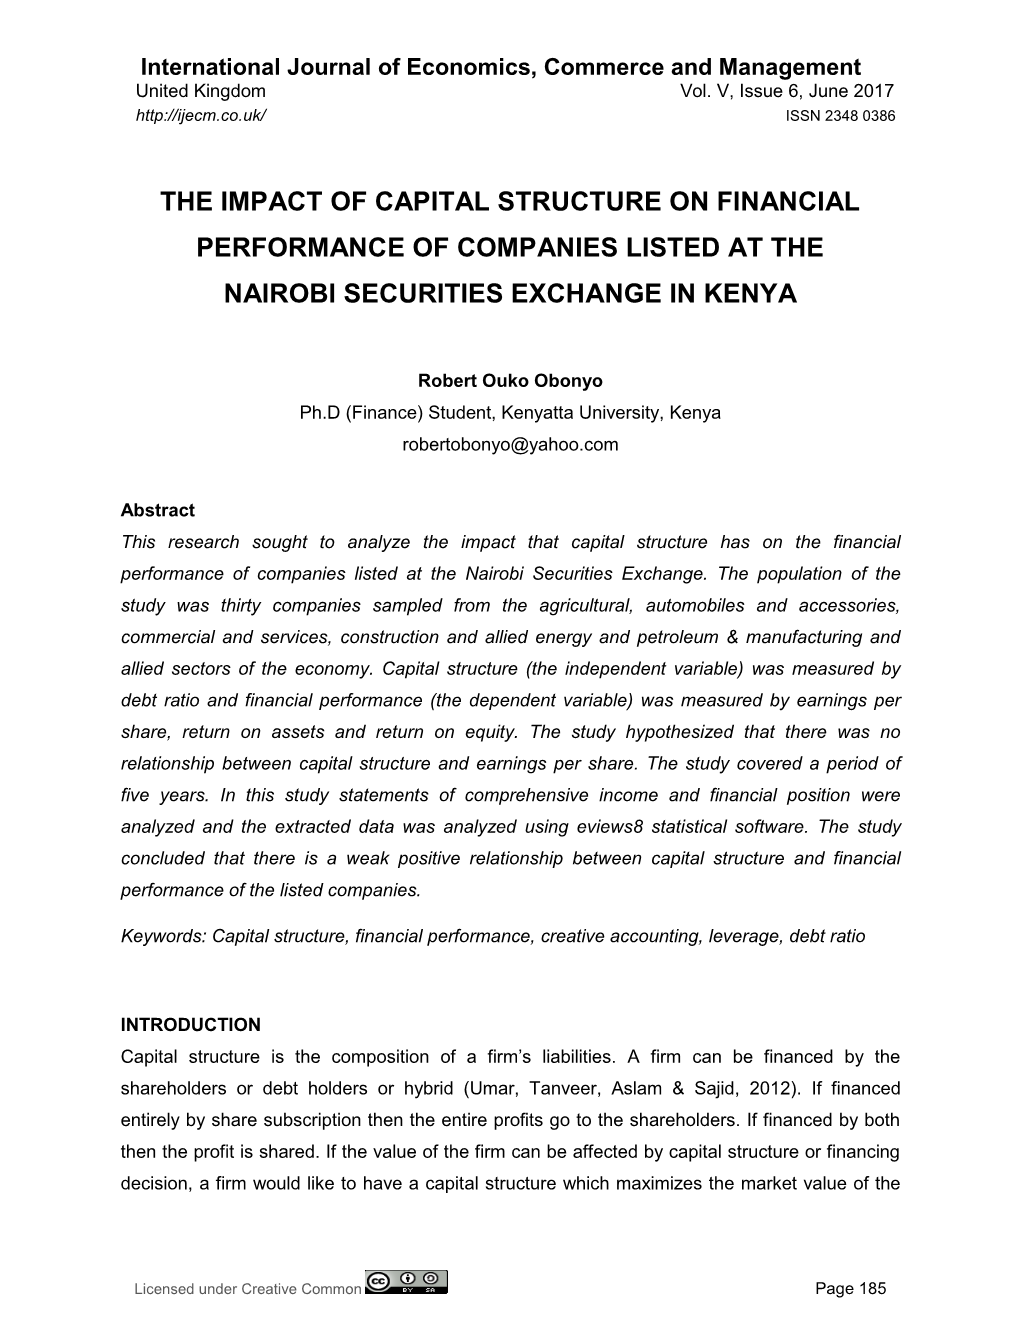 The Impact of Capital Structure on Financial Performance of Companies Listed at the Nairobi Securities Exchange in Kenya